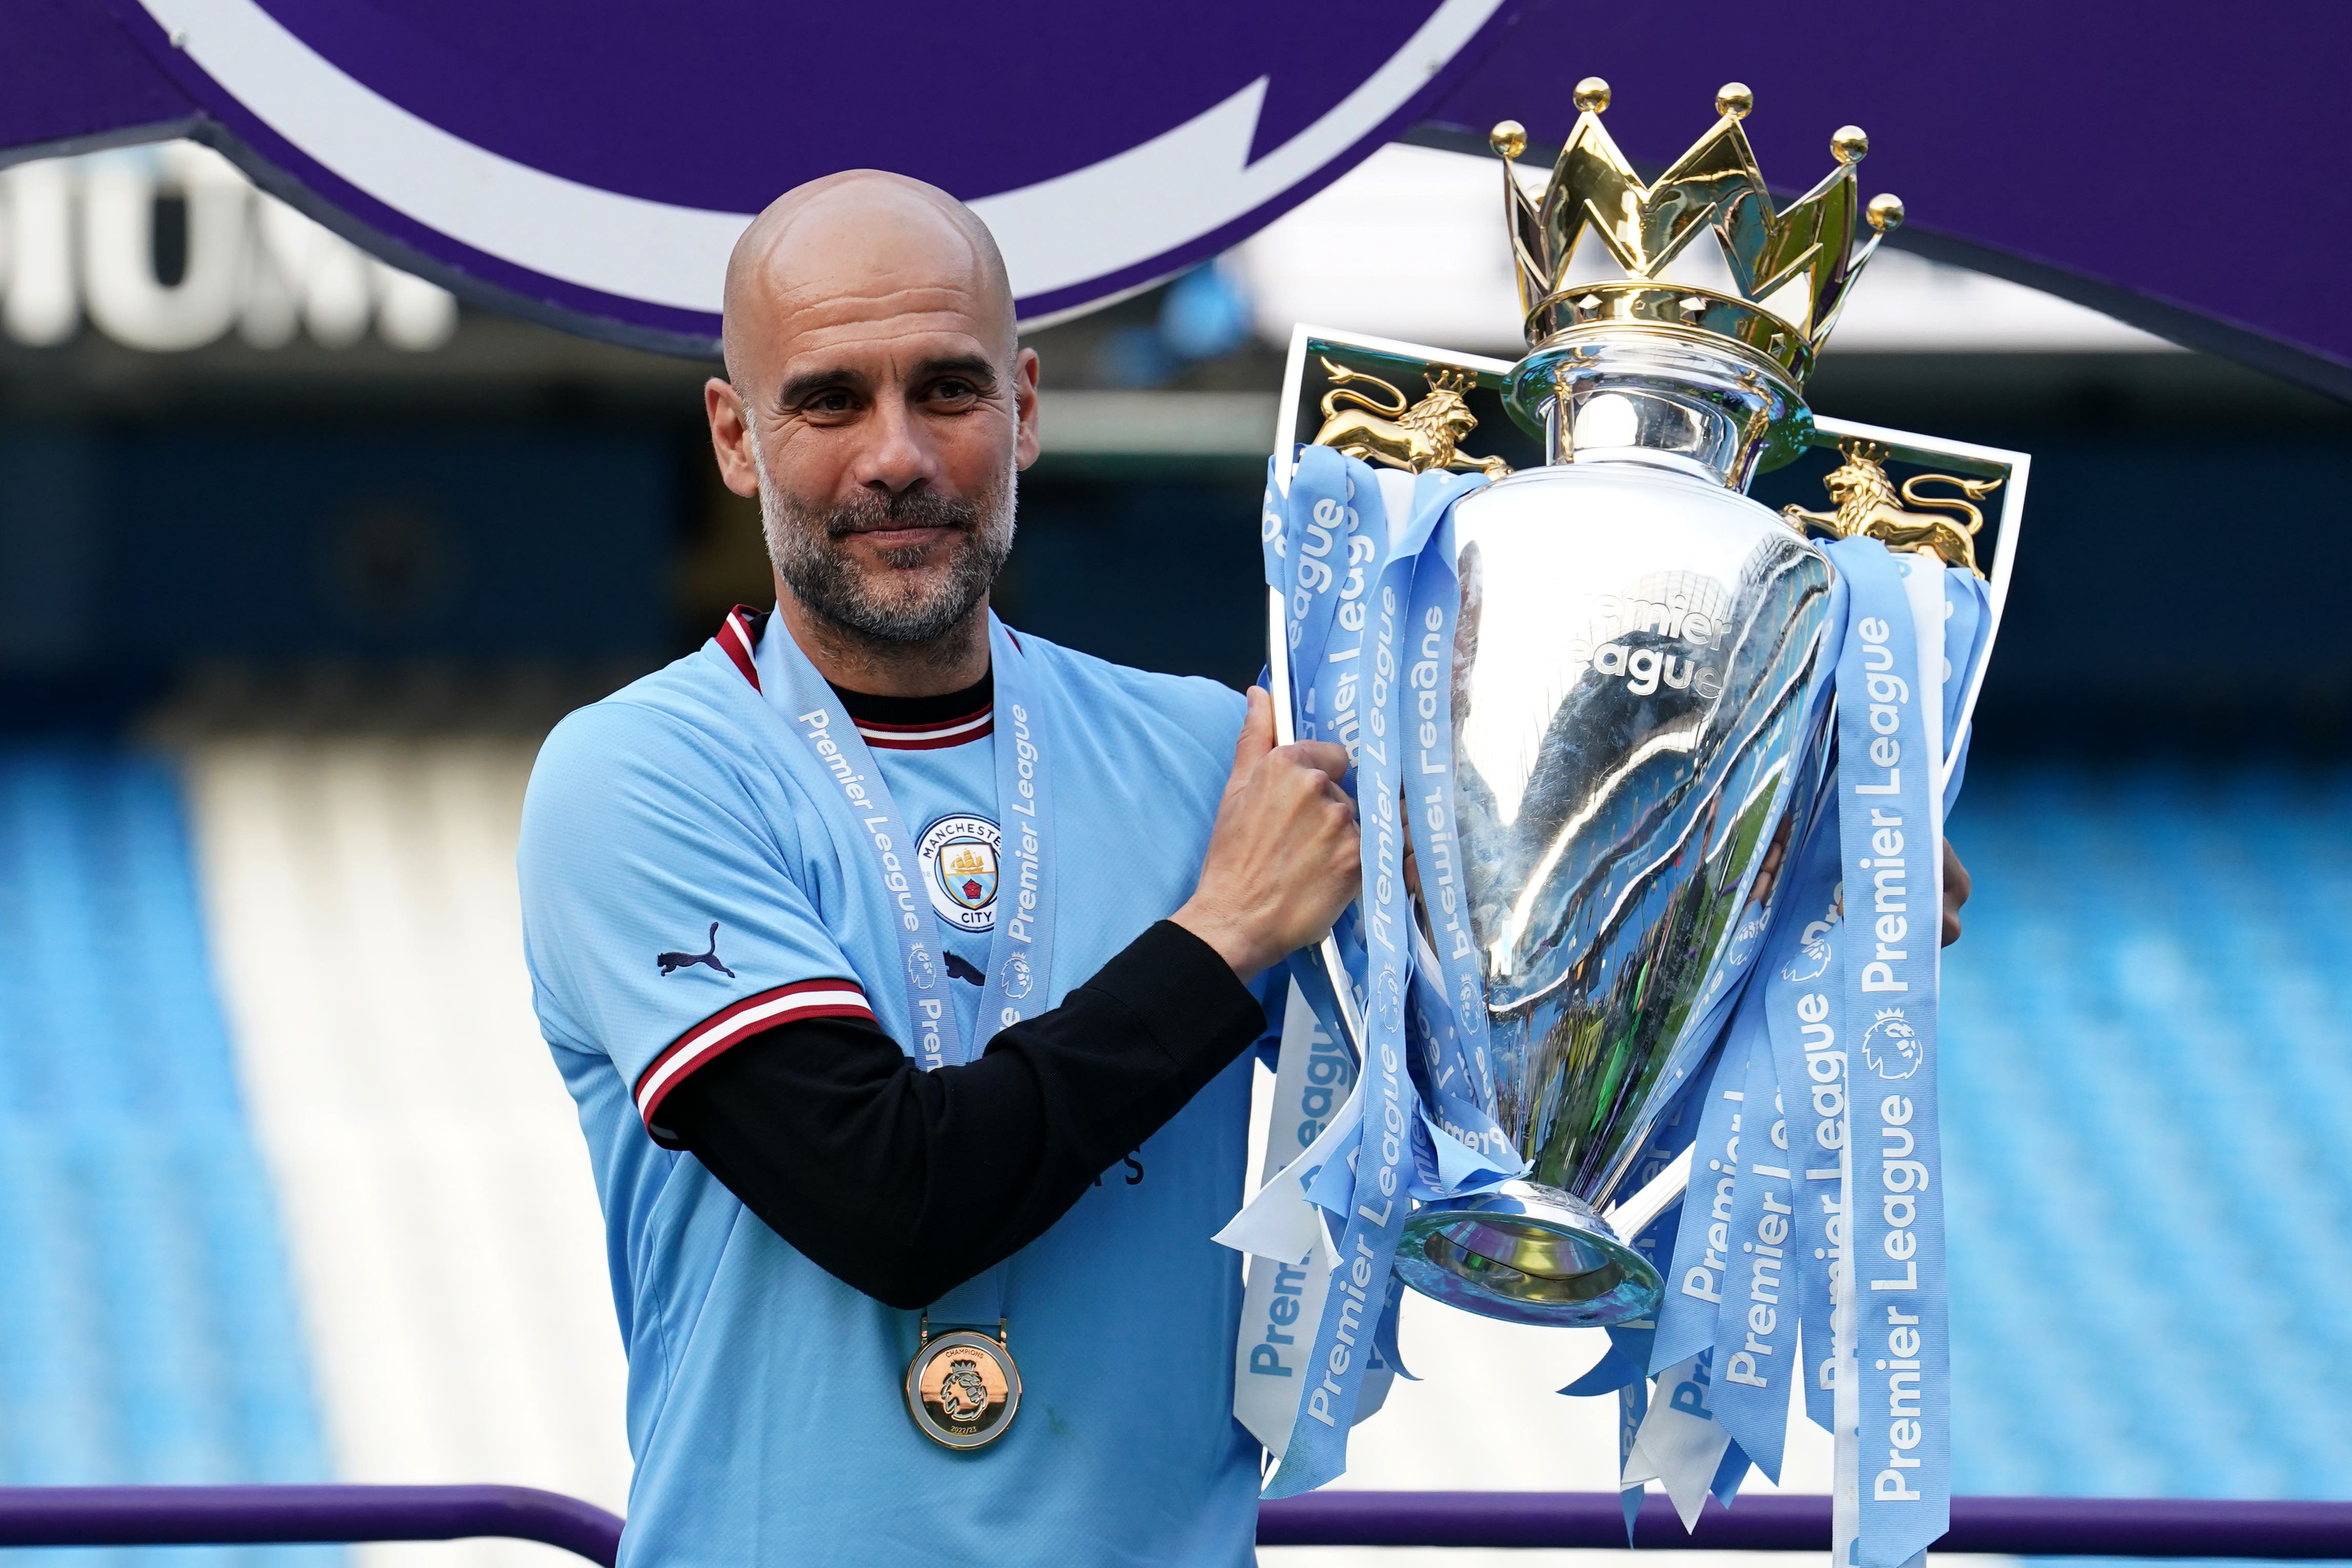 Pep Guardiola Looking Beyond Last League Match To Cup Finals